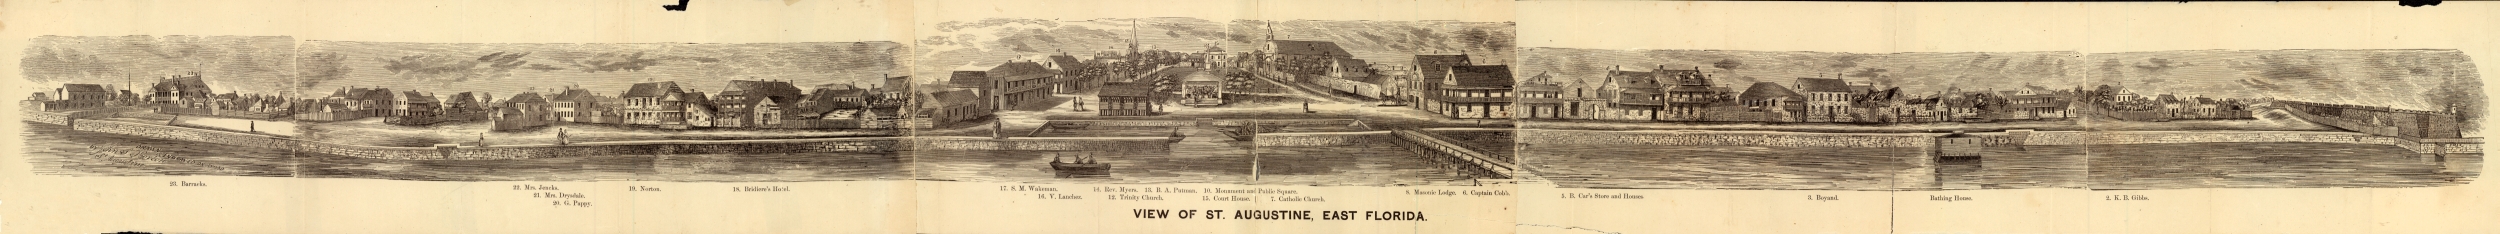 View of St. Augustine, 1860